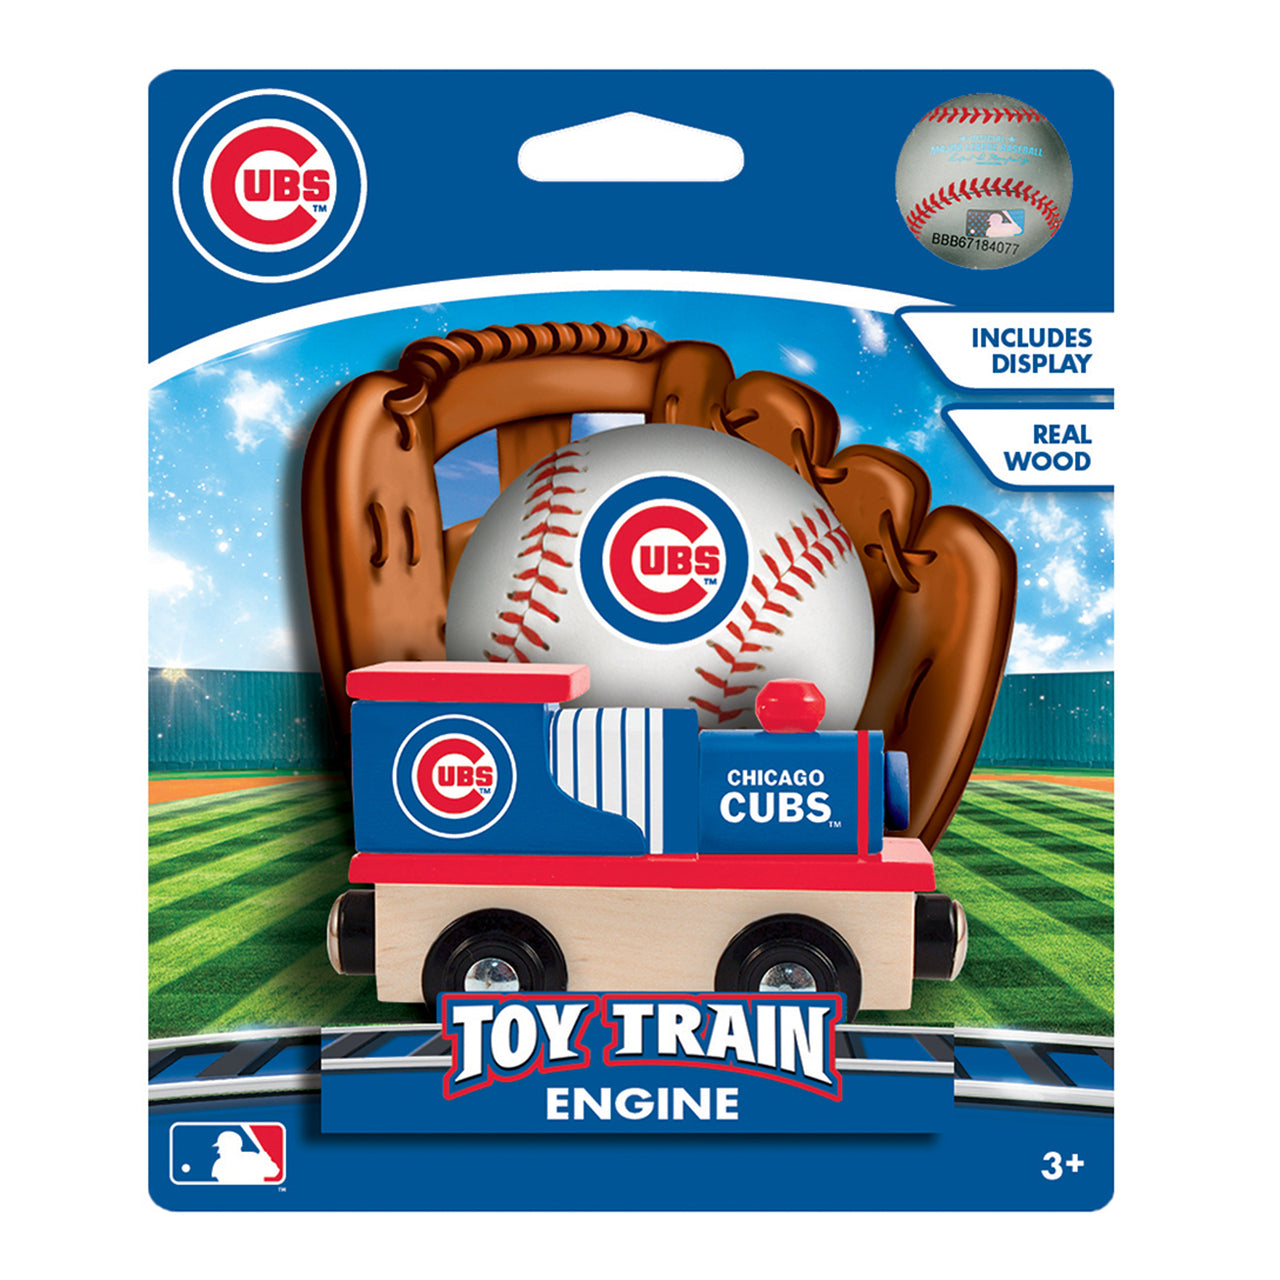 CHICAGO CUBS SPORTS TOY TRAIN ENGINE